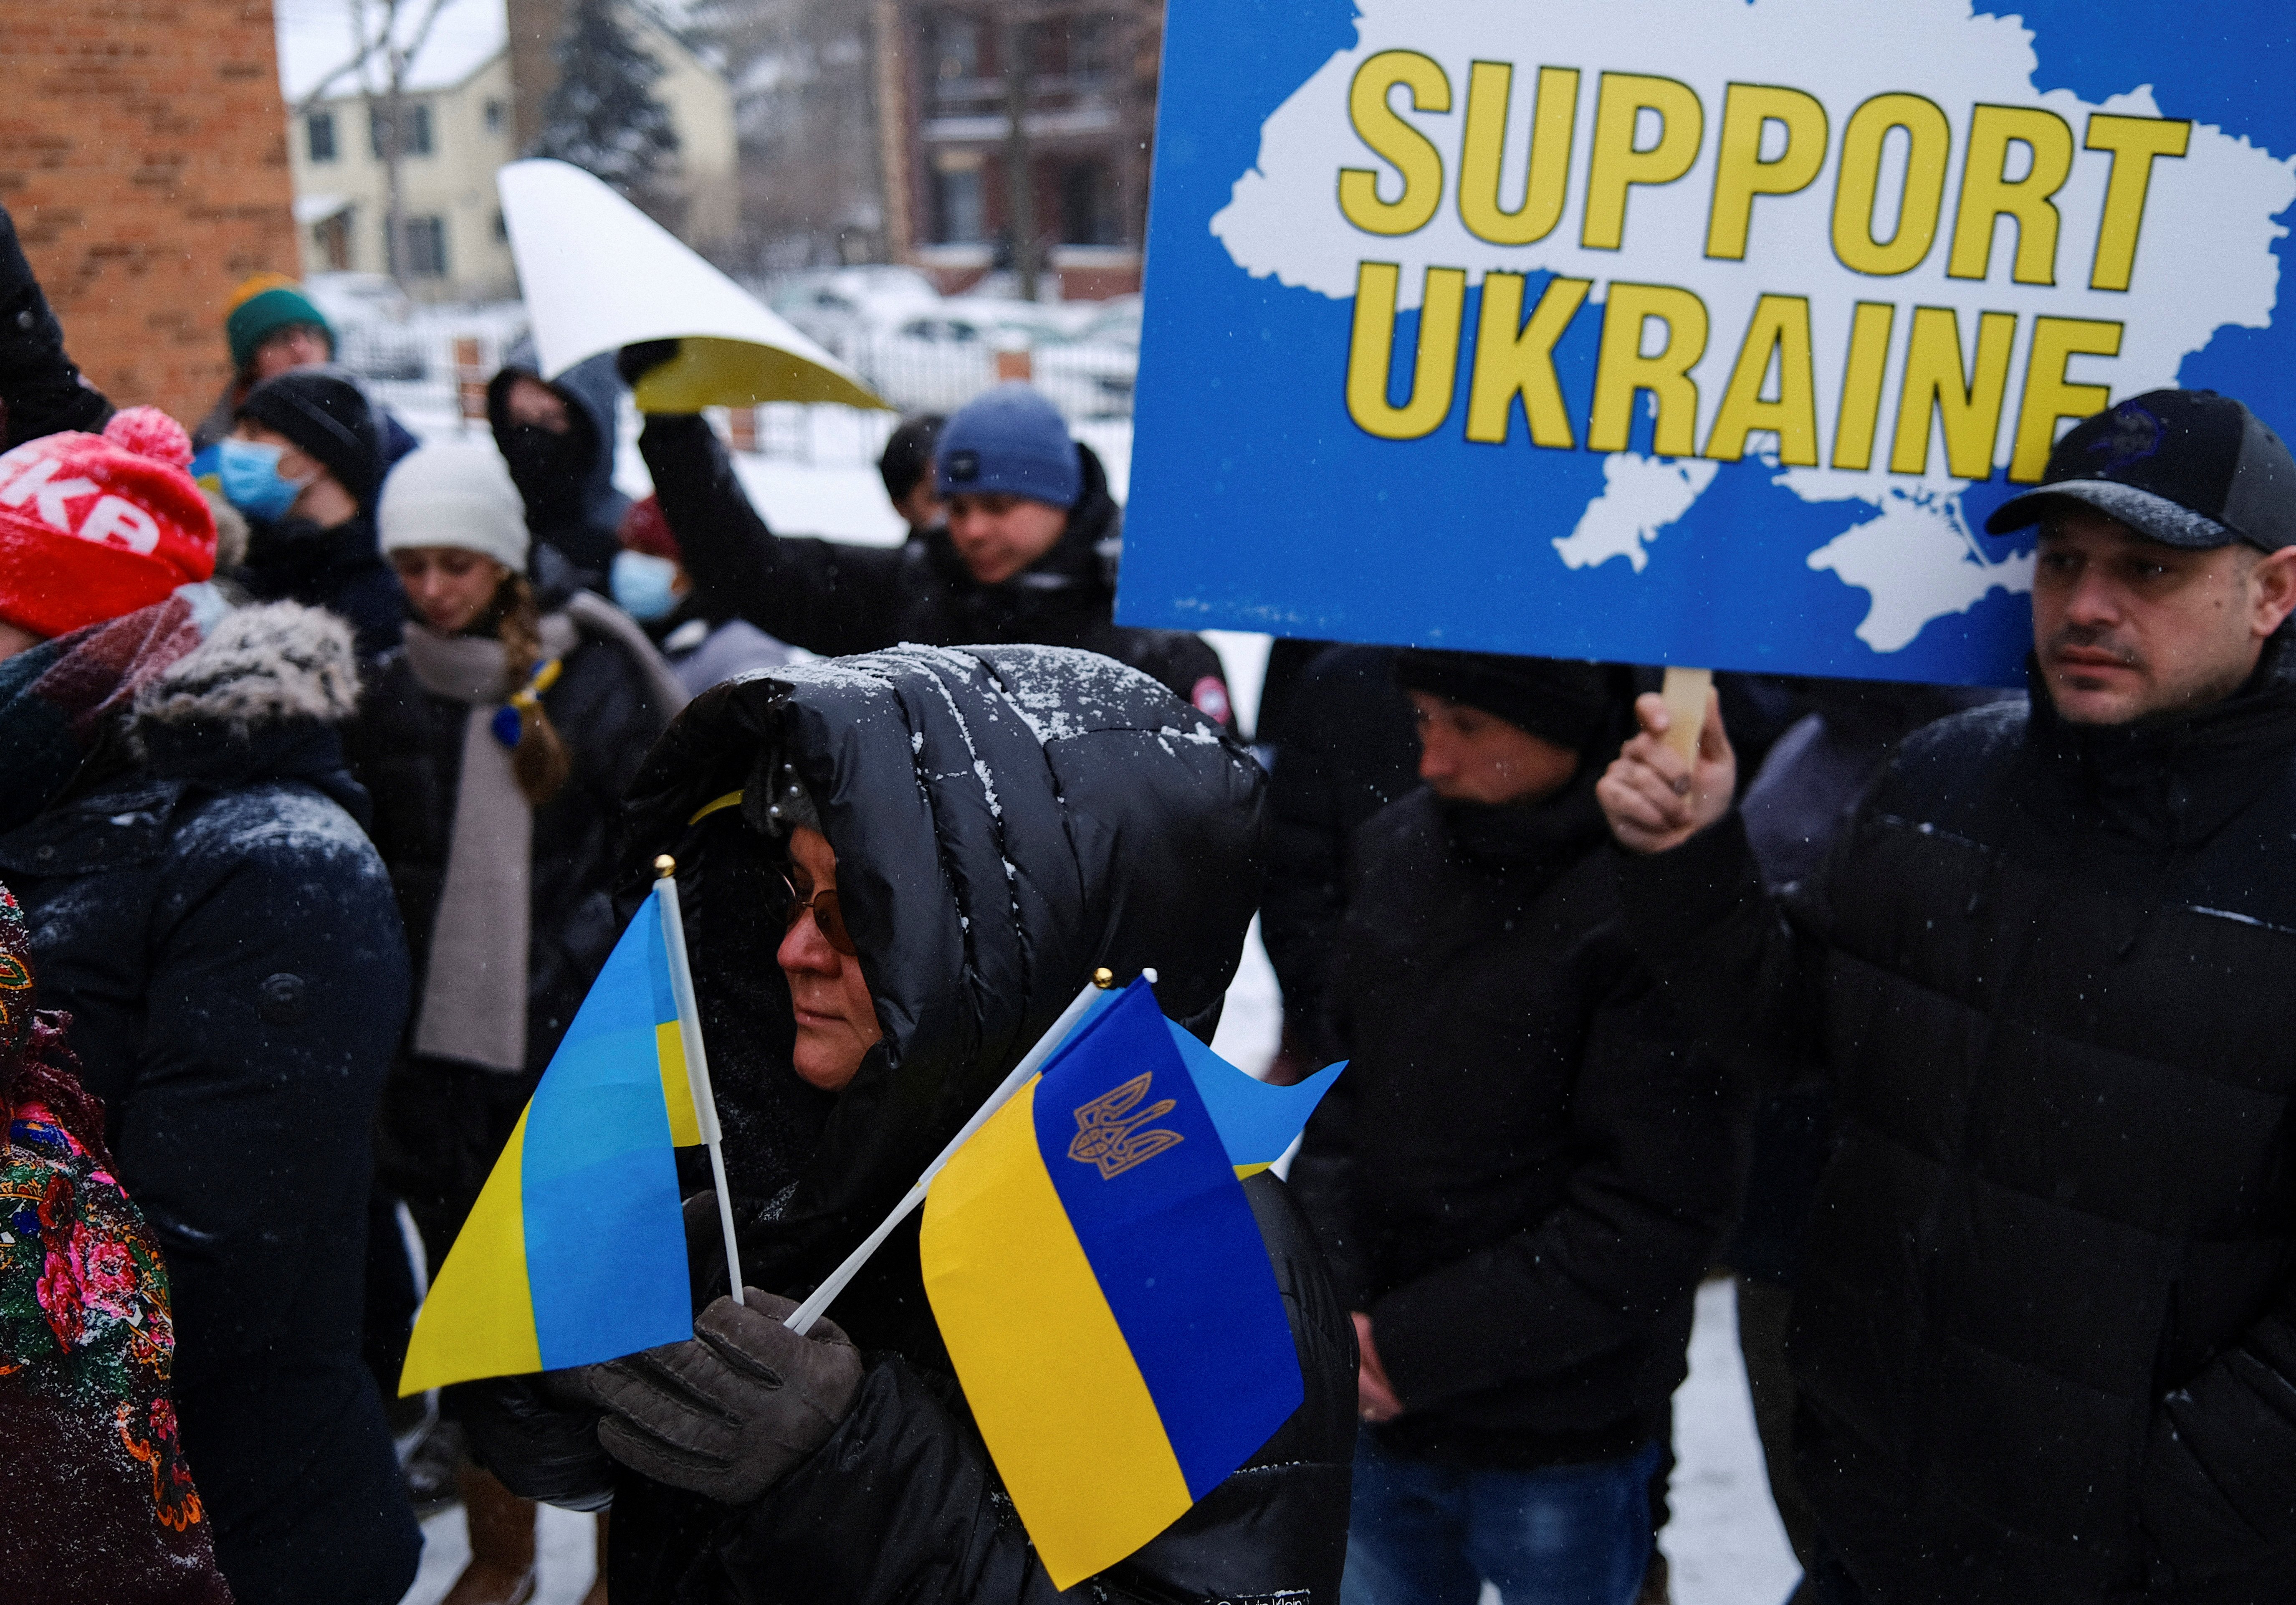 Ukraine supporters rally outside St. Constantine Ukrainian Catholic Church in Minneapolis Feb. 24, 2022, after Russia launched a massive military operation against Ukraine. (CNS photo/Stephen Maturen, Reuters)